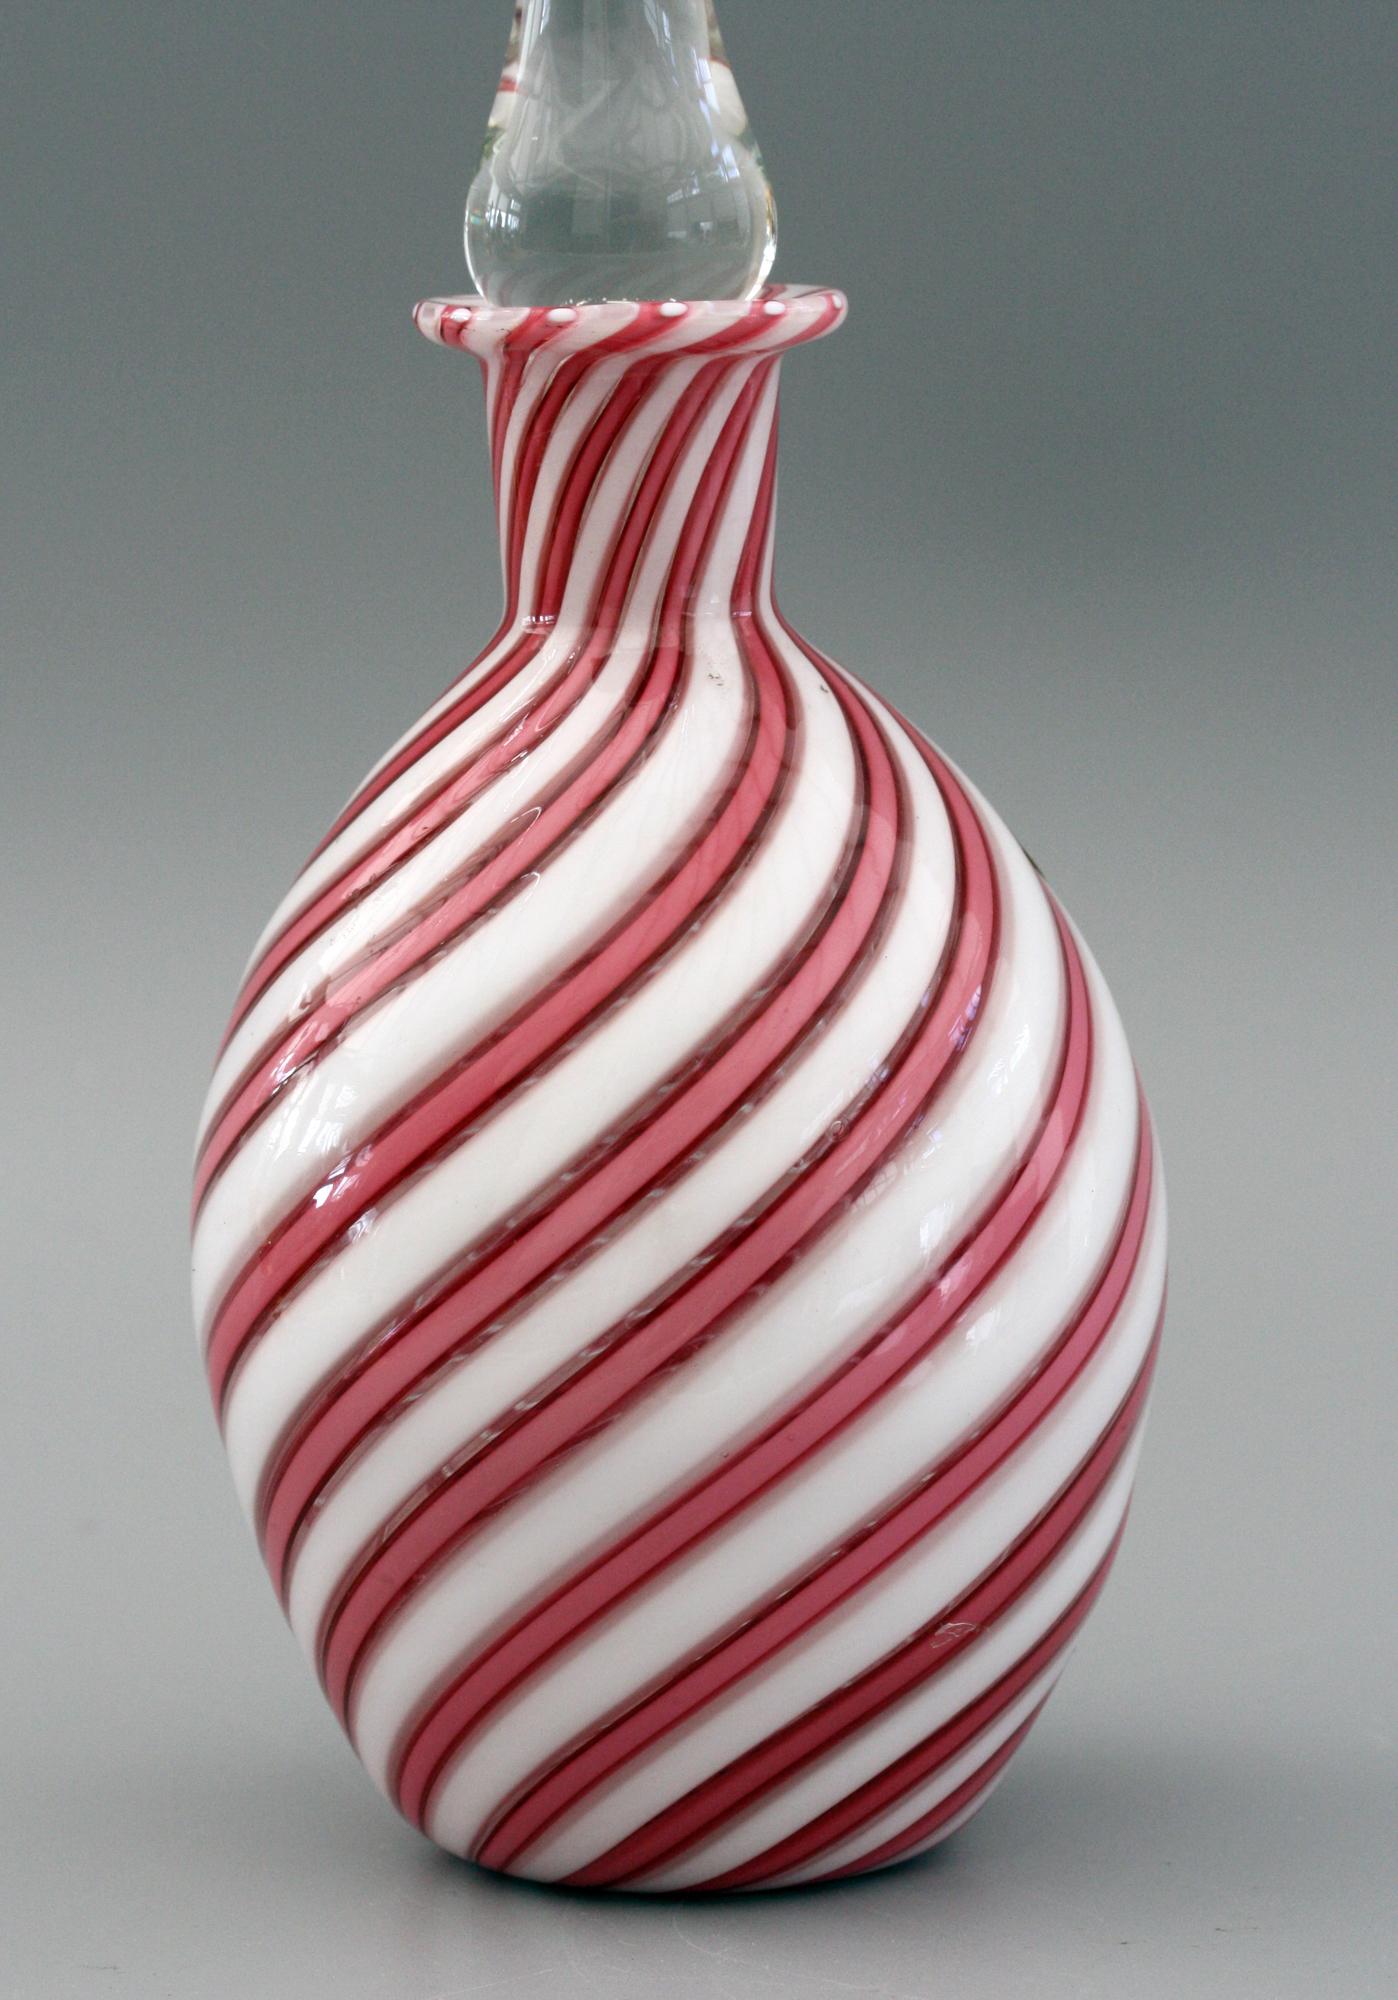 A very stylish vintage Italian Murano hand blown art glass scent bottle and stopper in pink and white ribbon design dating from the 20th century. This elegant bottle has an oval shaped body with narrow funnel shaped neck with a fold back top rim